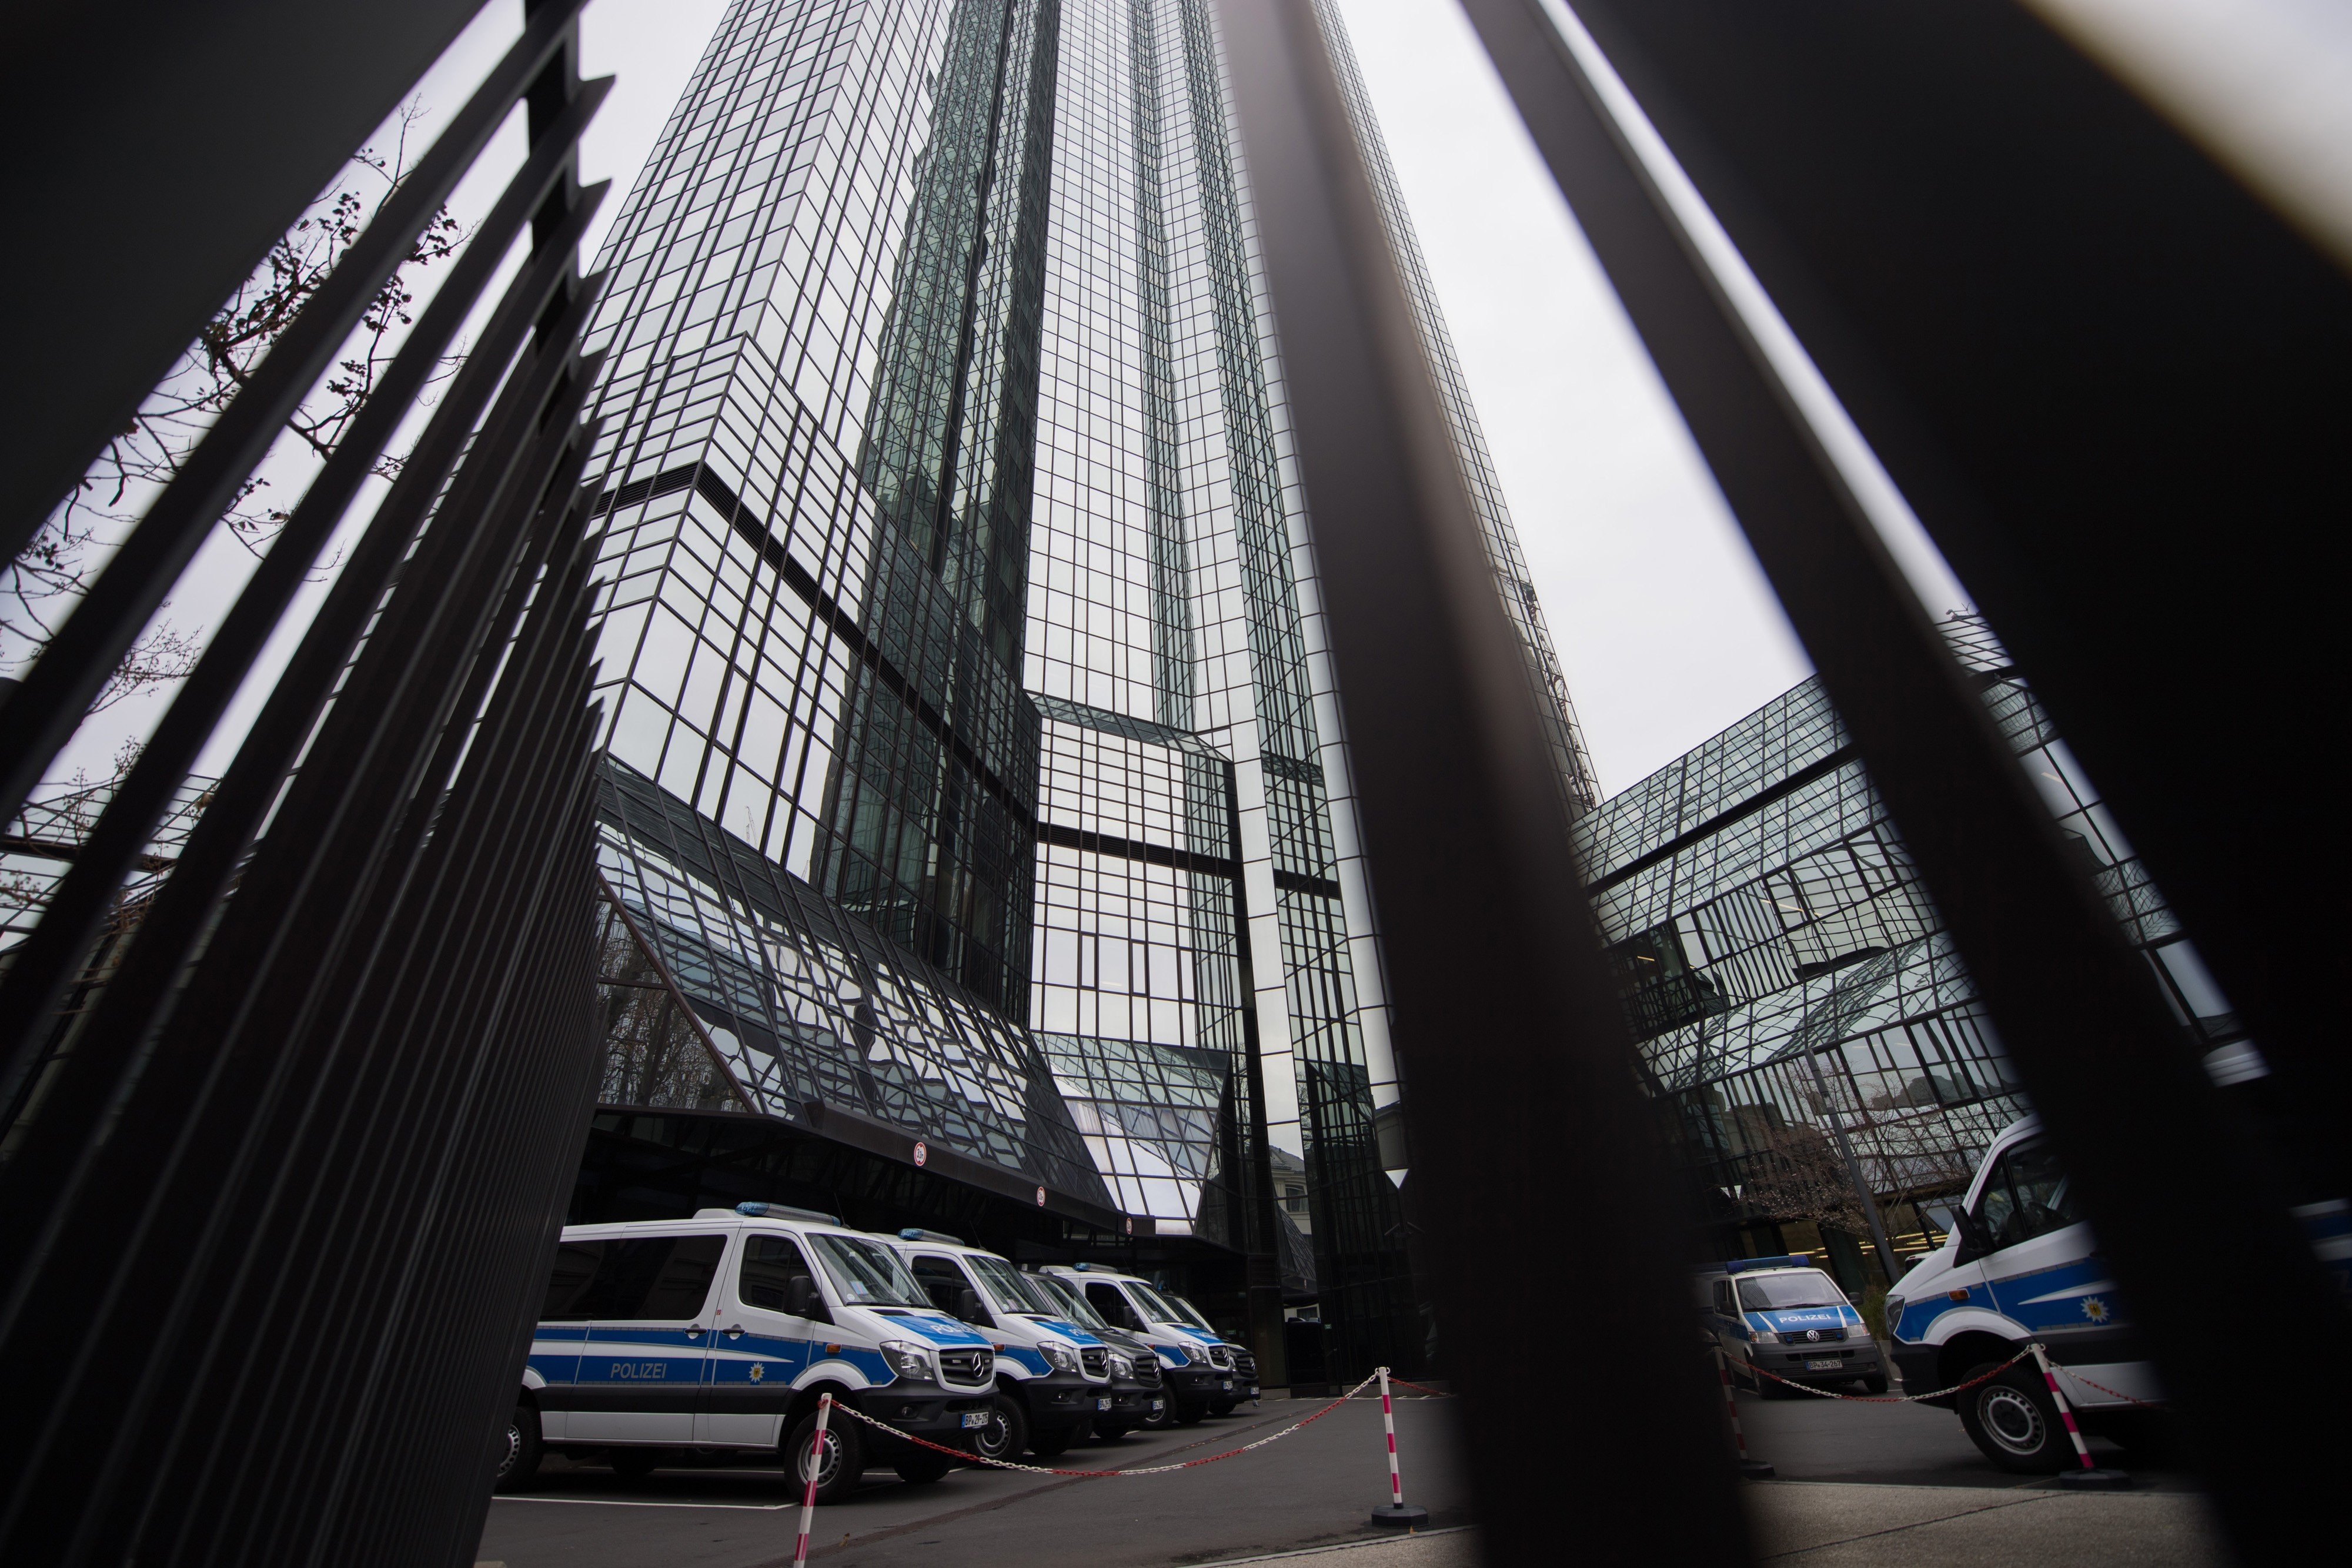 Police vans sit outside the headquarters of Deutsche Bank AG during a police raid. Photo: Bloomberg